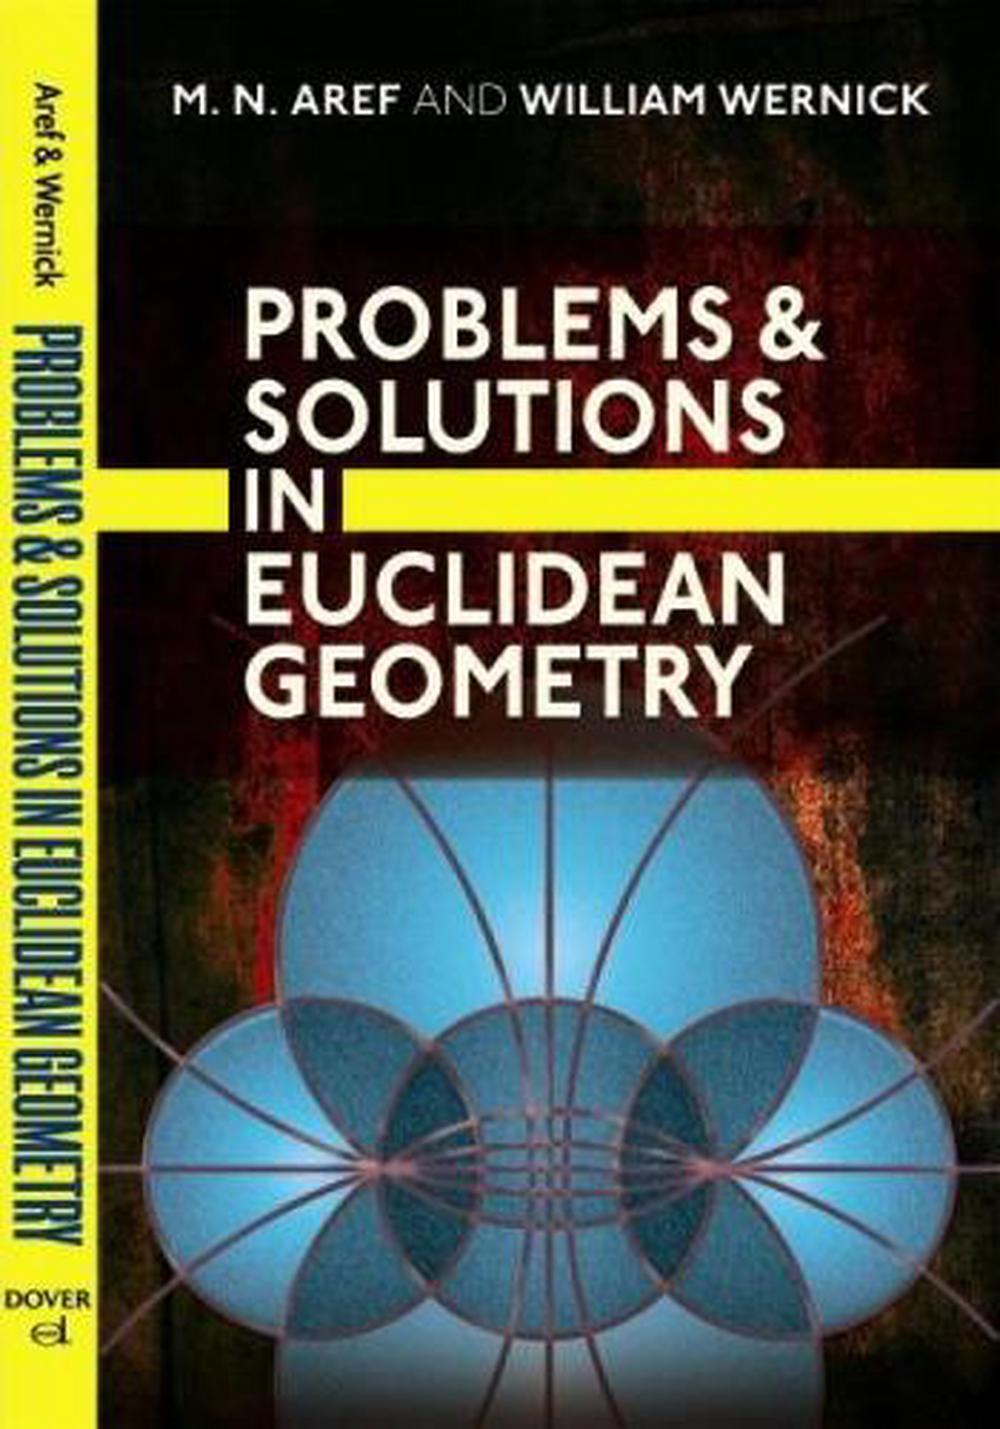 euclidean and non euclidean geometry solutions chapter 1